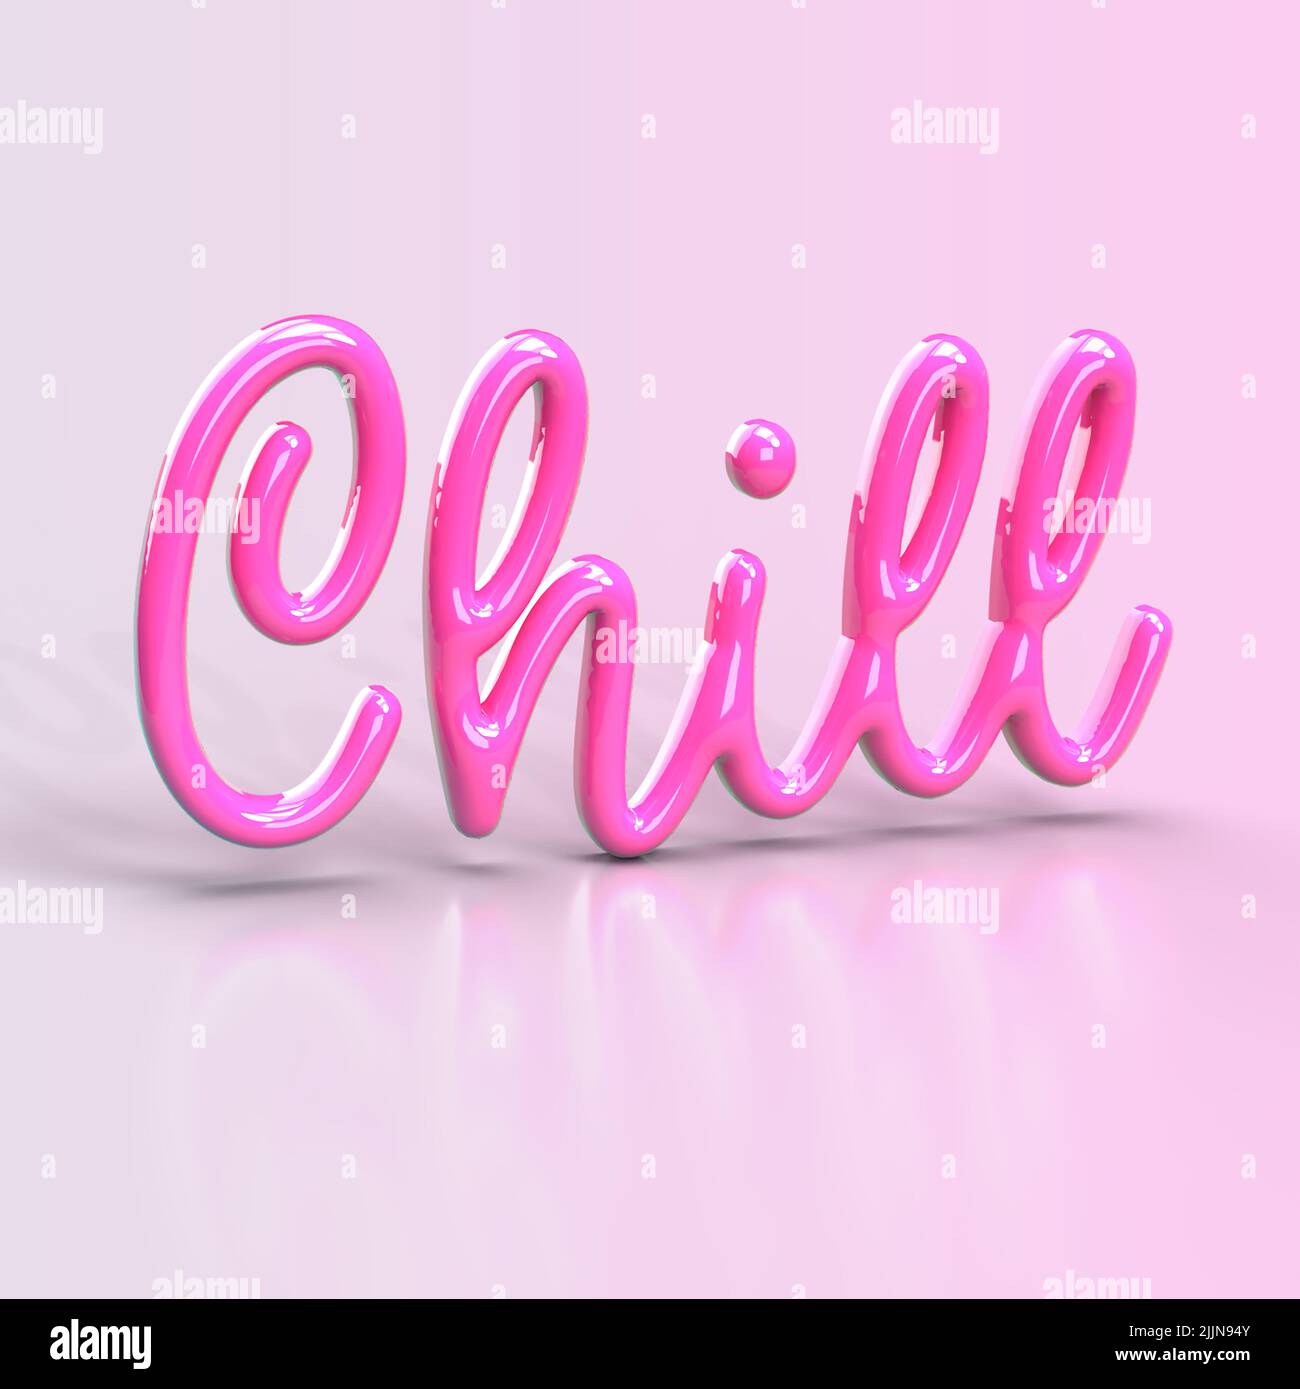 Chill 3D Render on a pink background Stock Photo